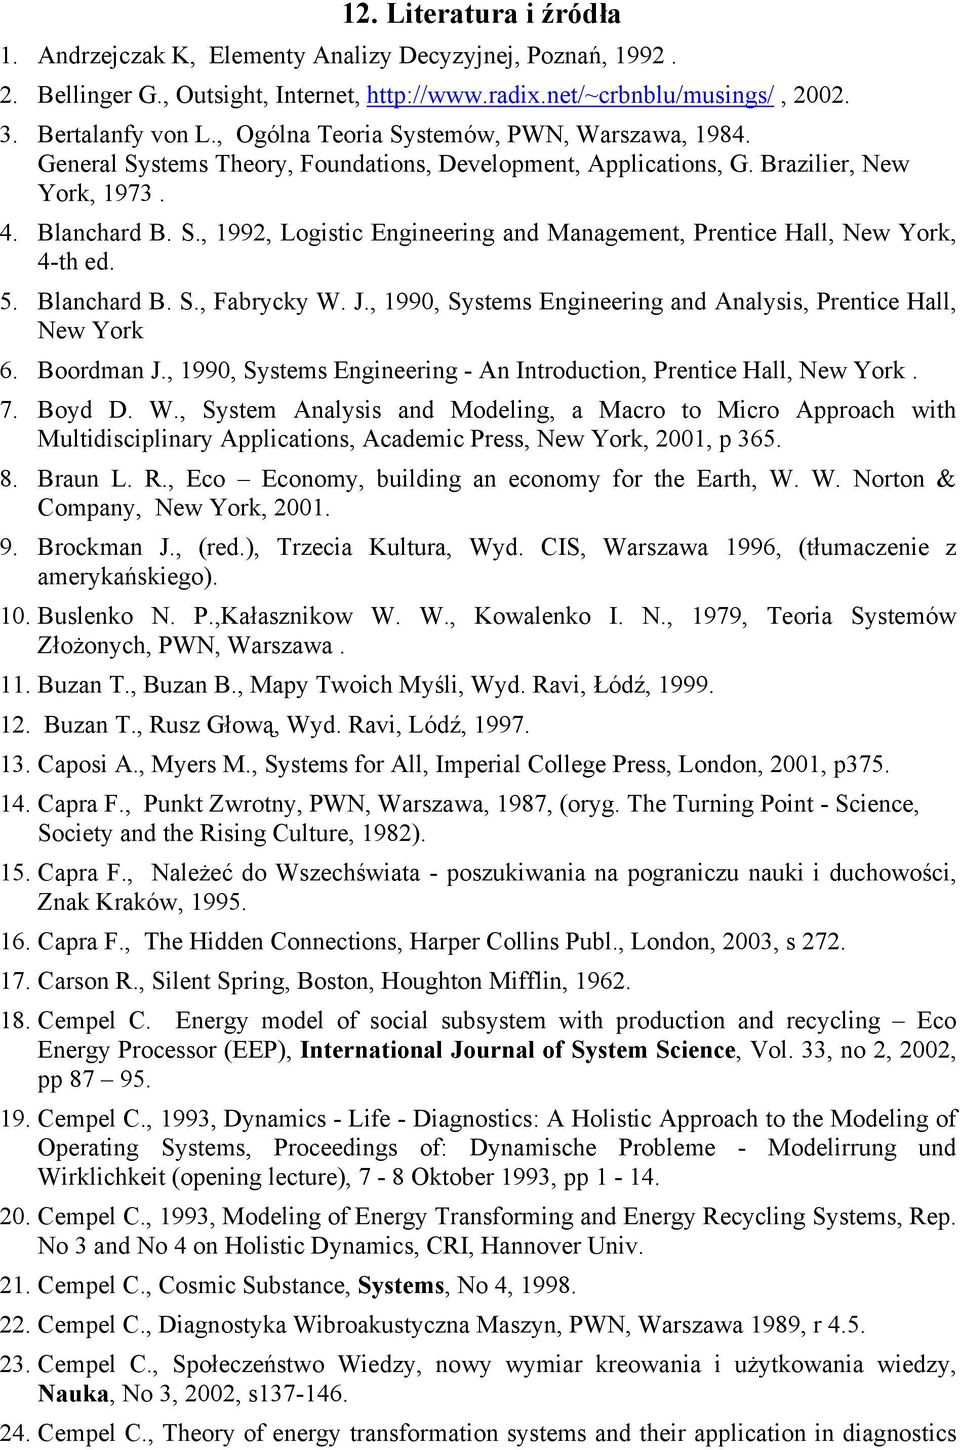 5. Blanchard B. S., Fabrycky W. J., 1990, Systems Engineering and Analysis, Prentice Hall, New York 6. Boordman J., 1990, Systems Engineering - An Introduction, Prentice Hall, New York. 7. Boyd D. W., System Analysis and Modeling, a Macro to Micro Approach with Multidisciplinary Applications, Academic Press, New York, 2001, p 365.